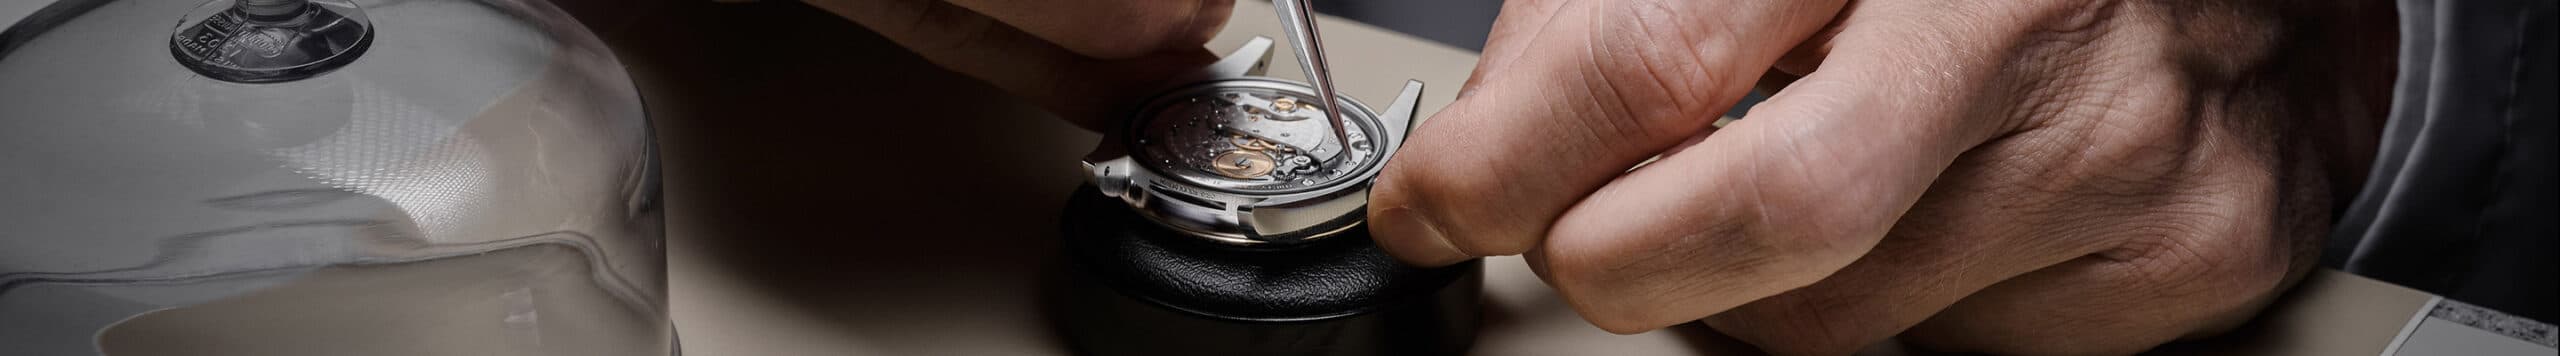 Servicing Your Rolex Image Banner 01 Scaled